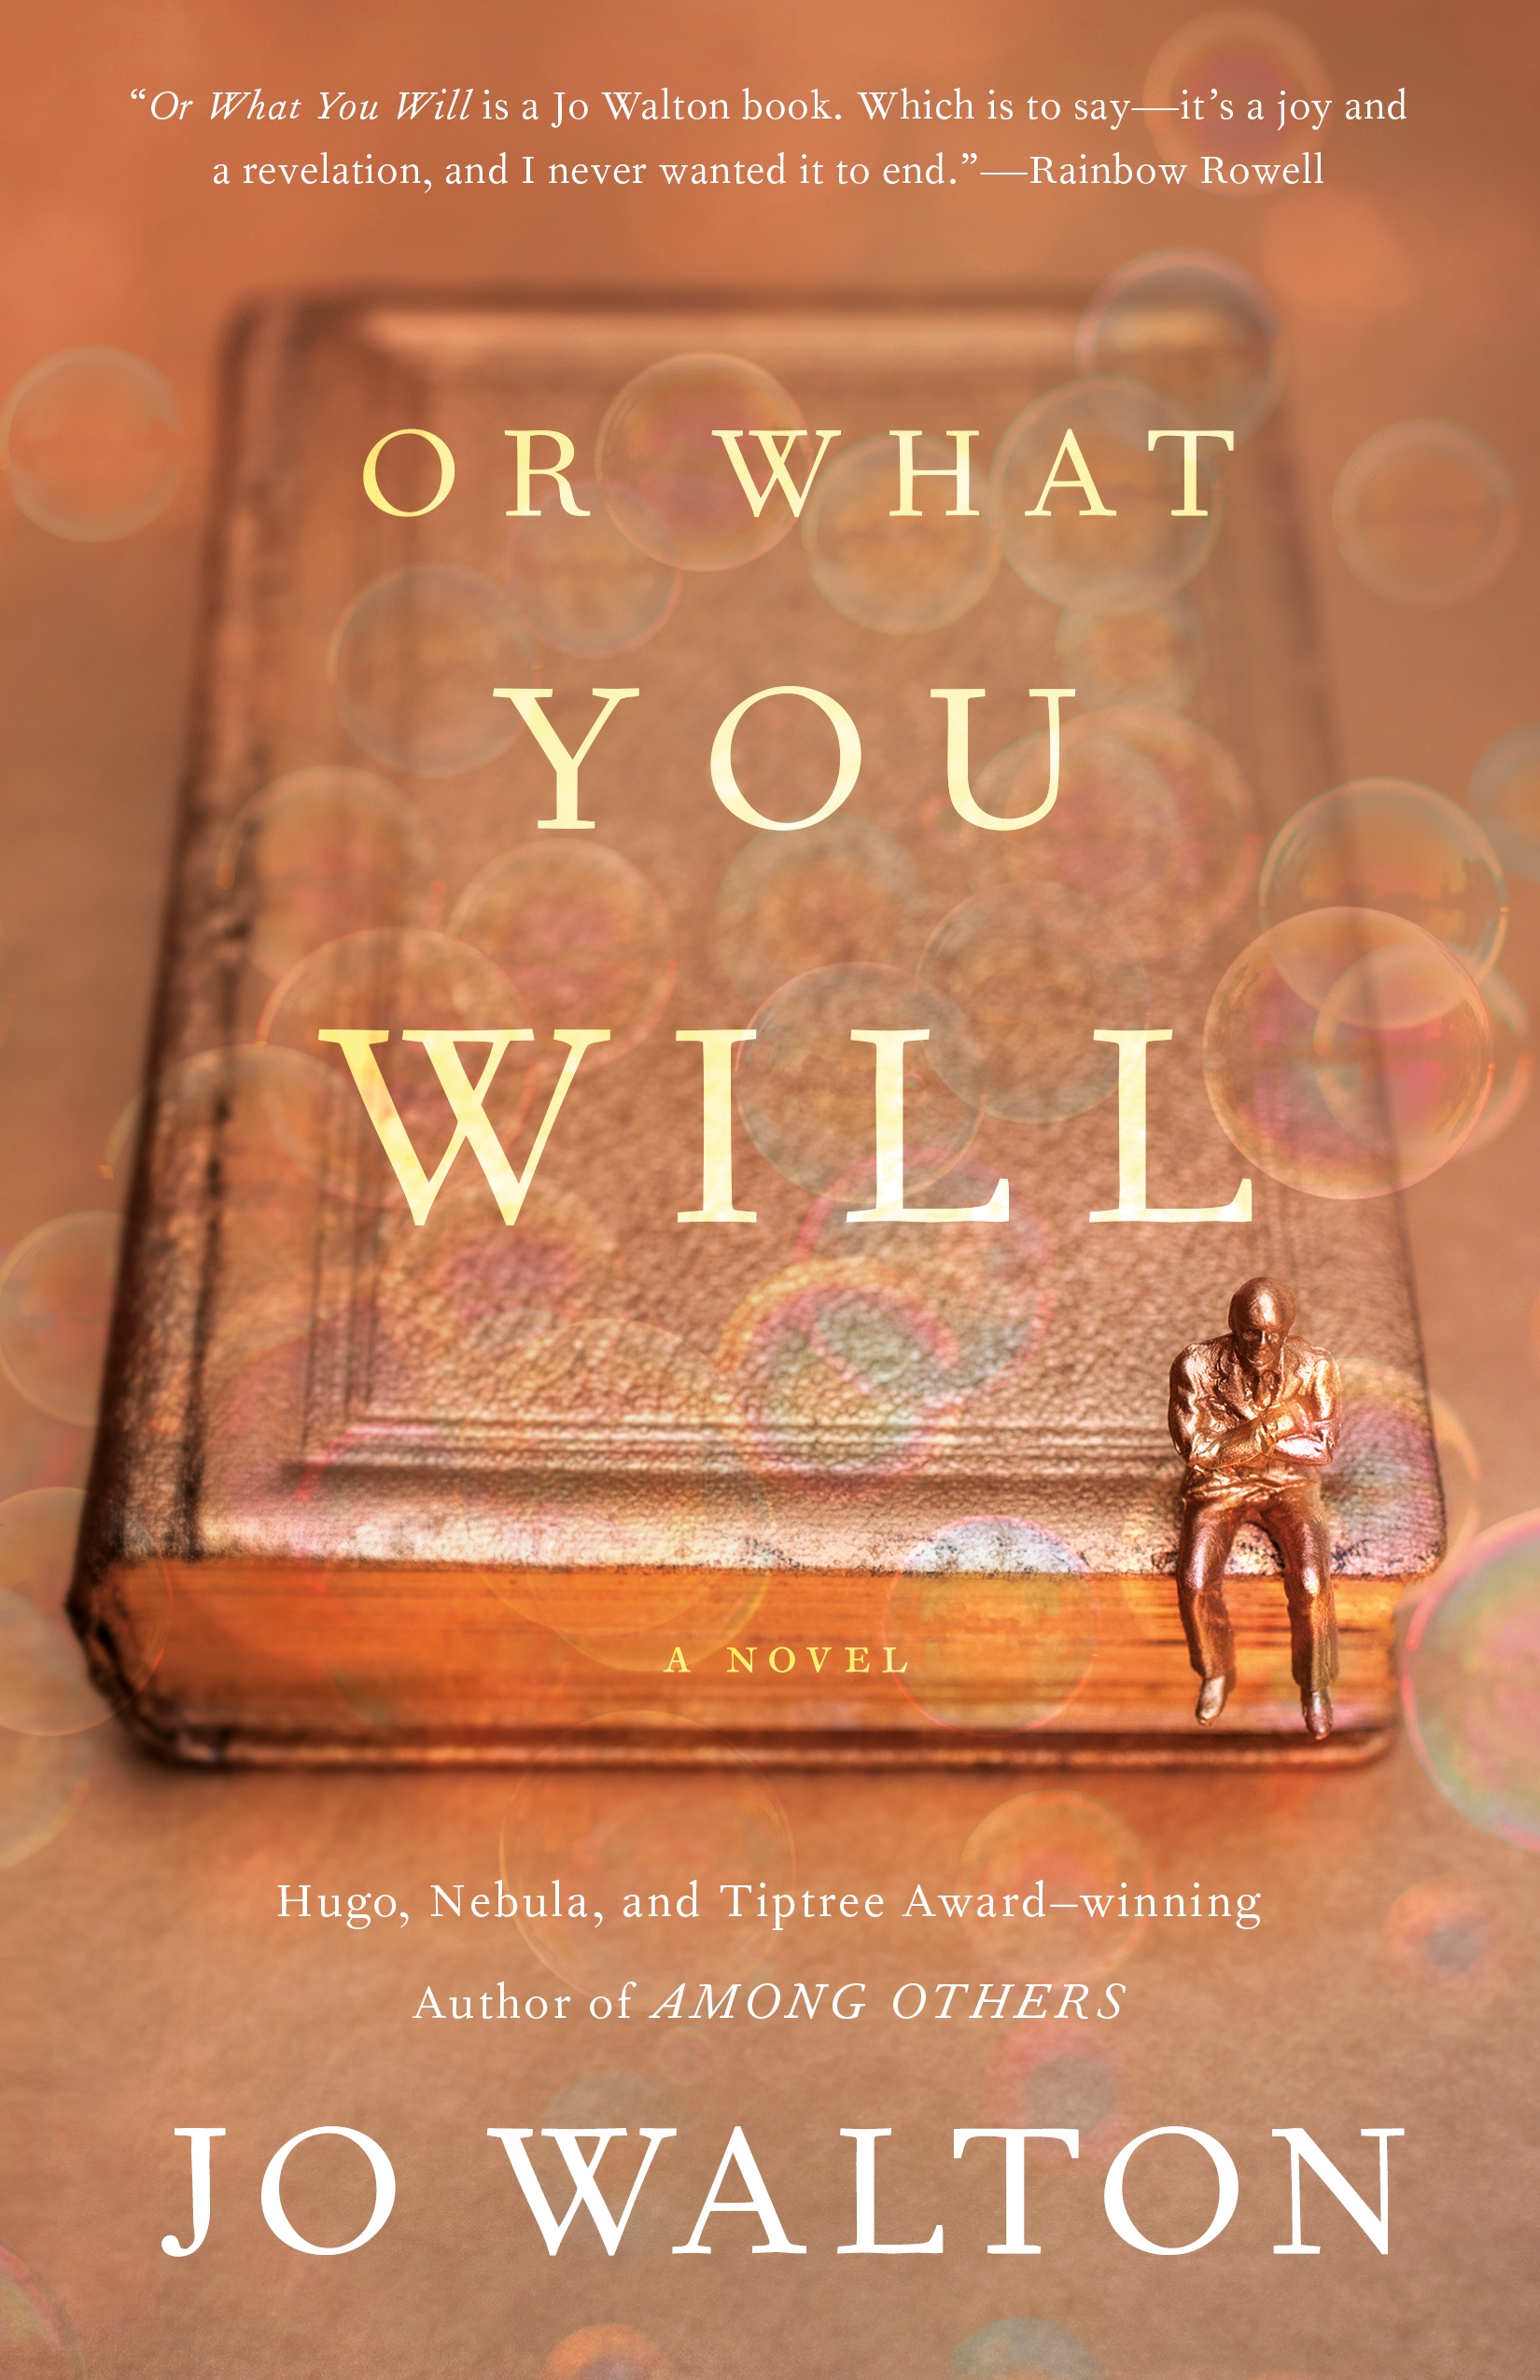 Or What You Will by Jo Walton